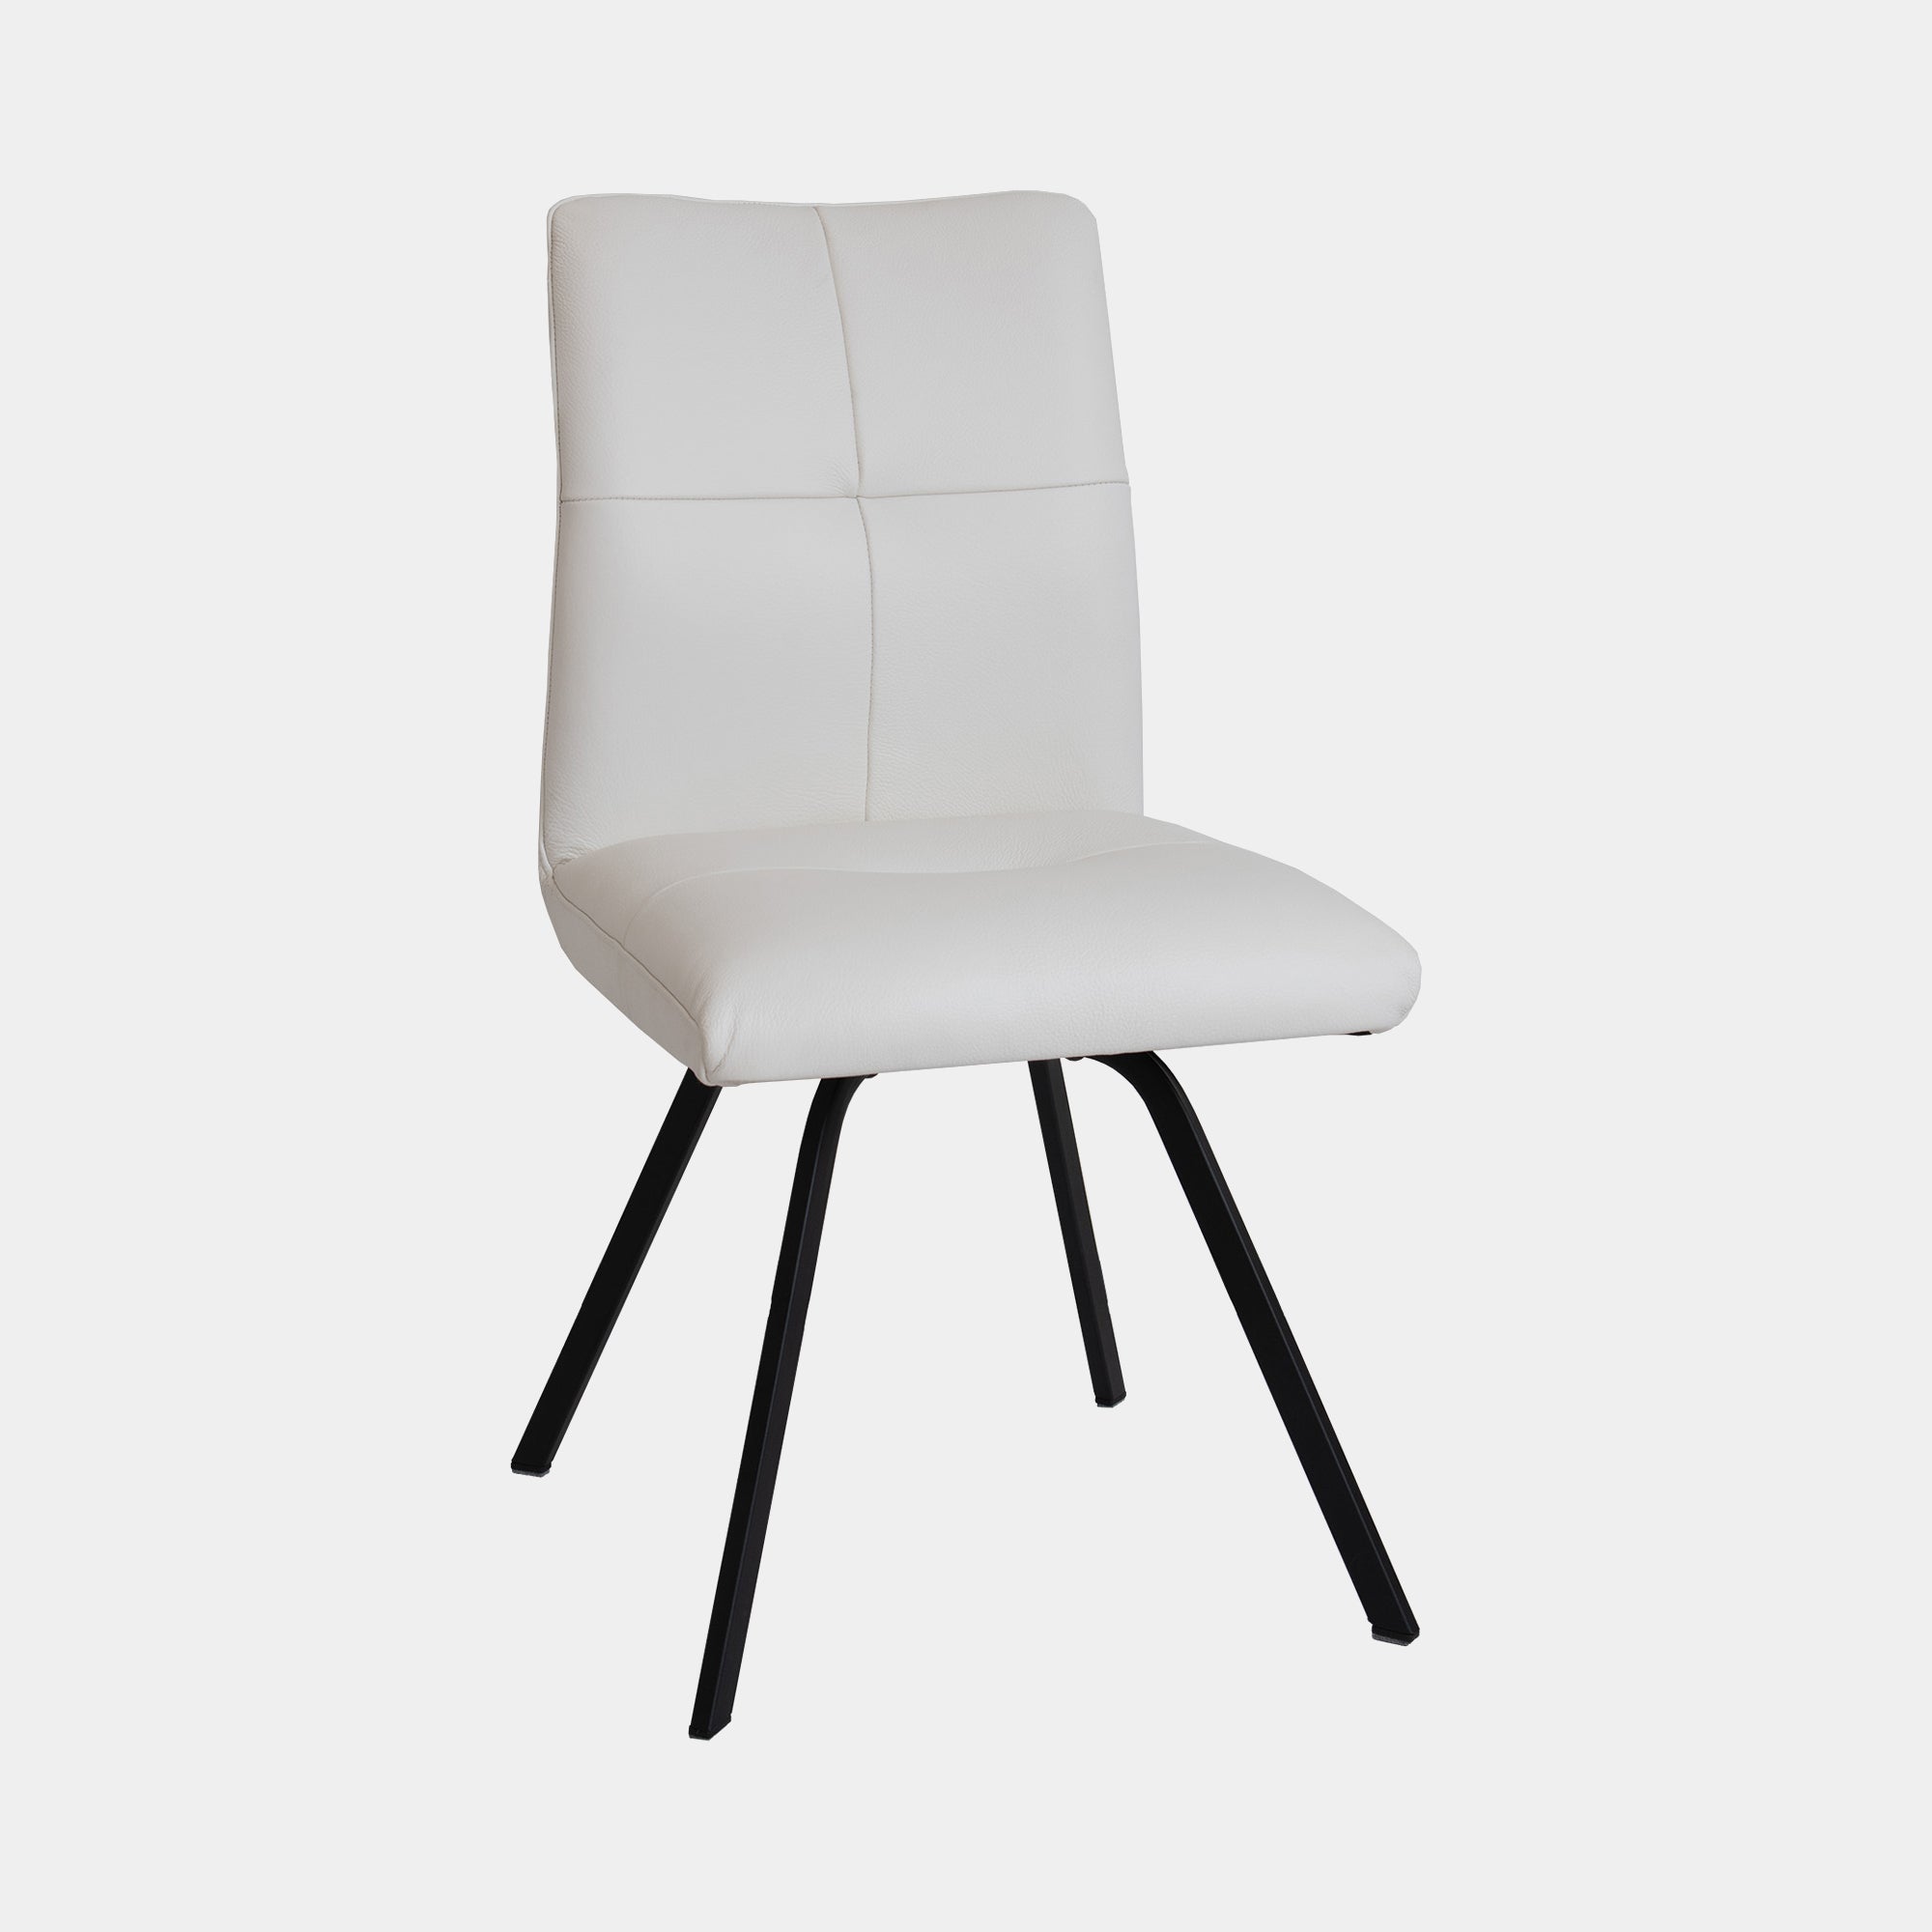 Clover - Dining Chair With 'A' Black Metal Leg In Soleda 448 White Leather